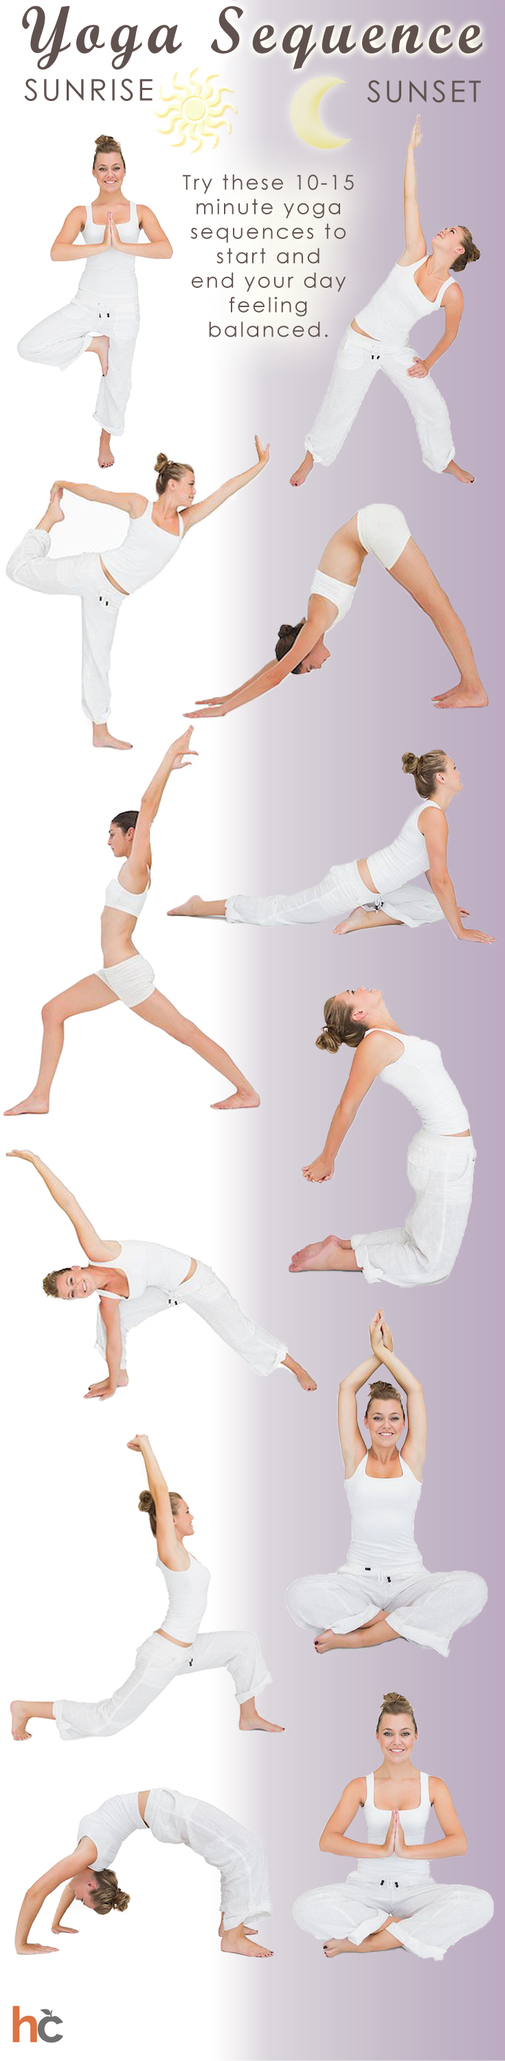 Daily Yoga Sequence for Morning & Night